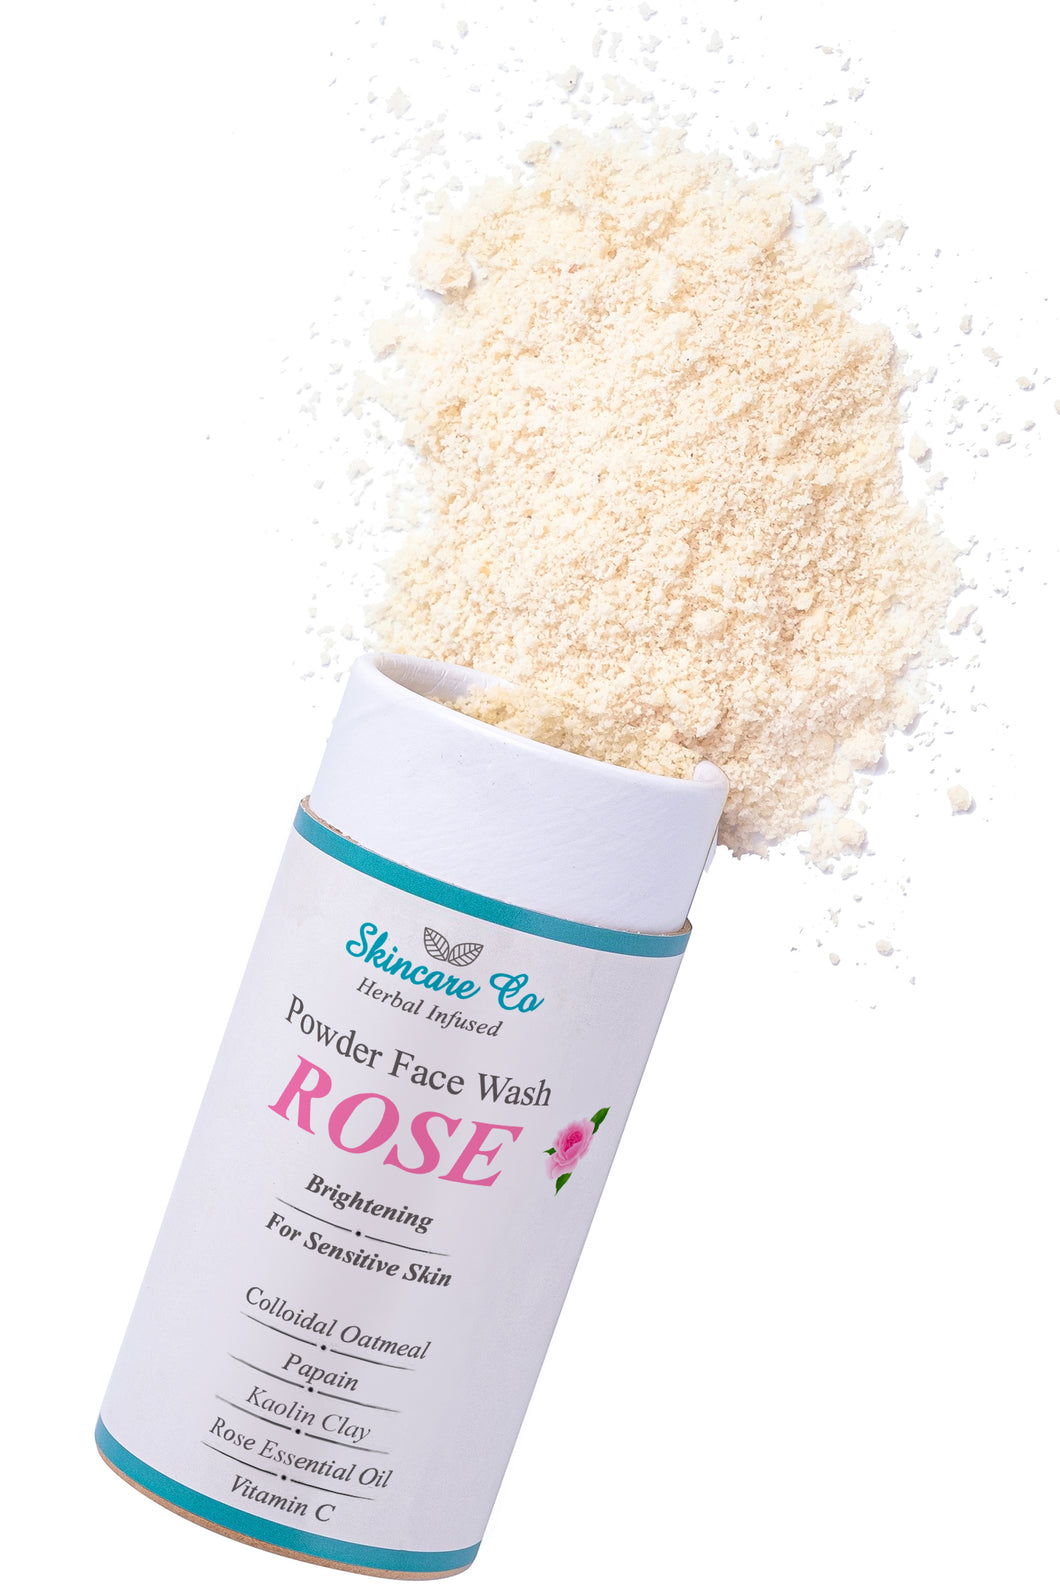 Rose Brightening Face Wash Powder for Sensitive Skin with Colloidal Oatmeal and Vitamin C